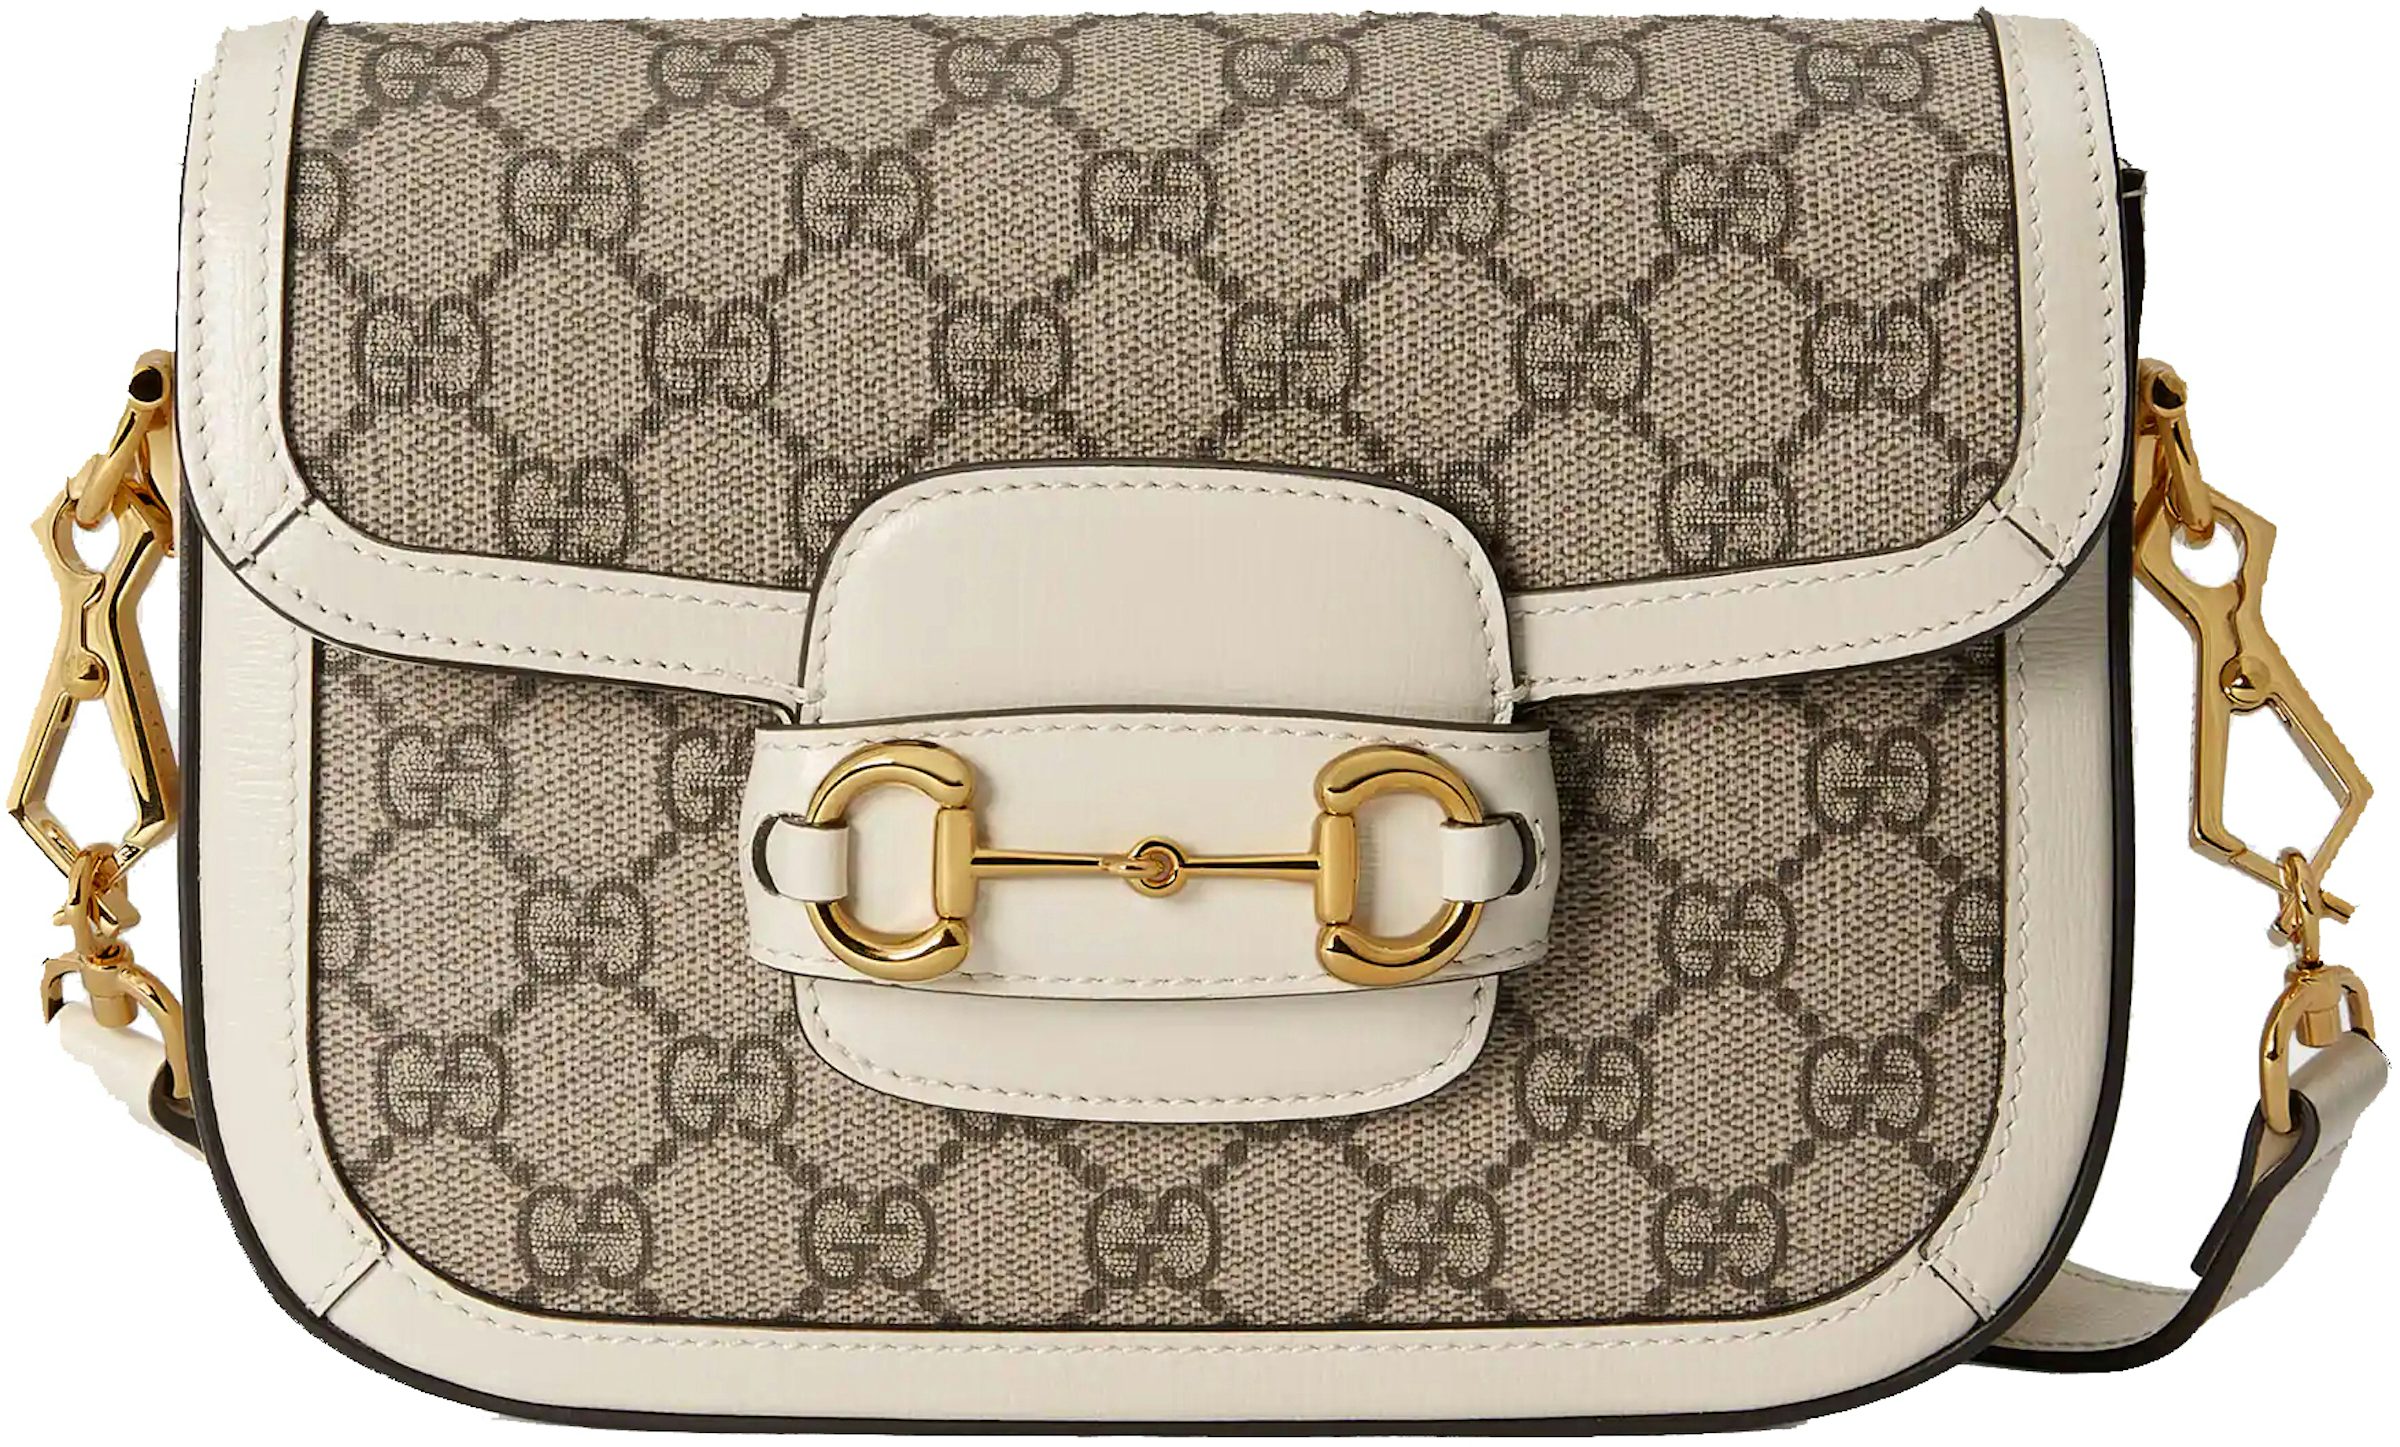 Gucci Horsebit 1955 small shoulder bag in white leather